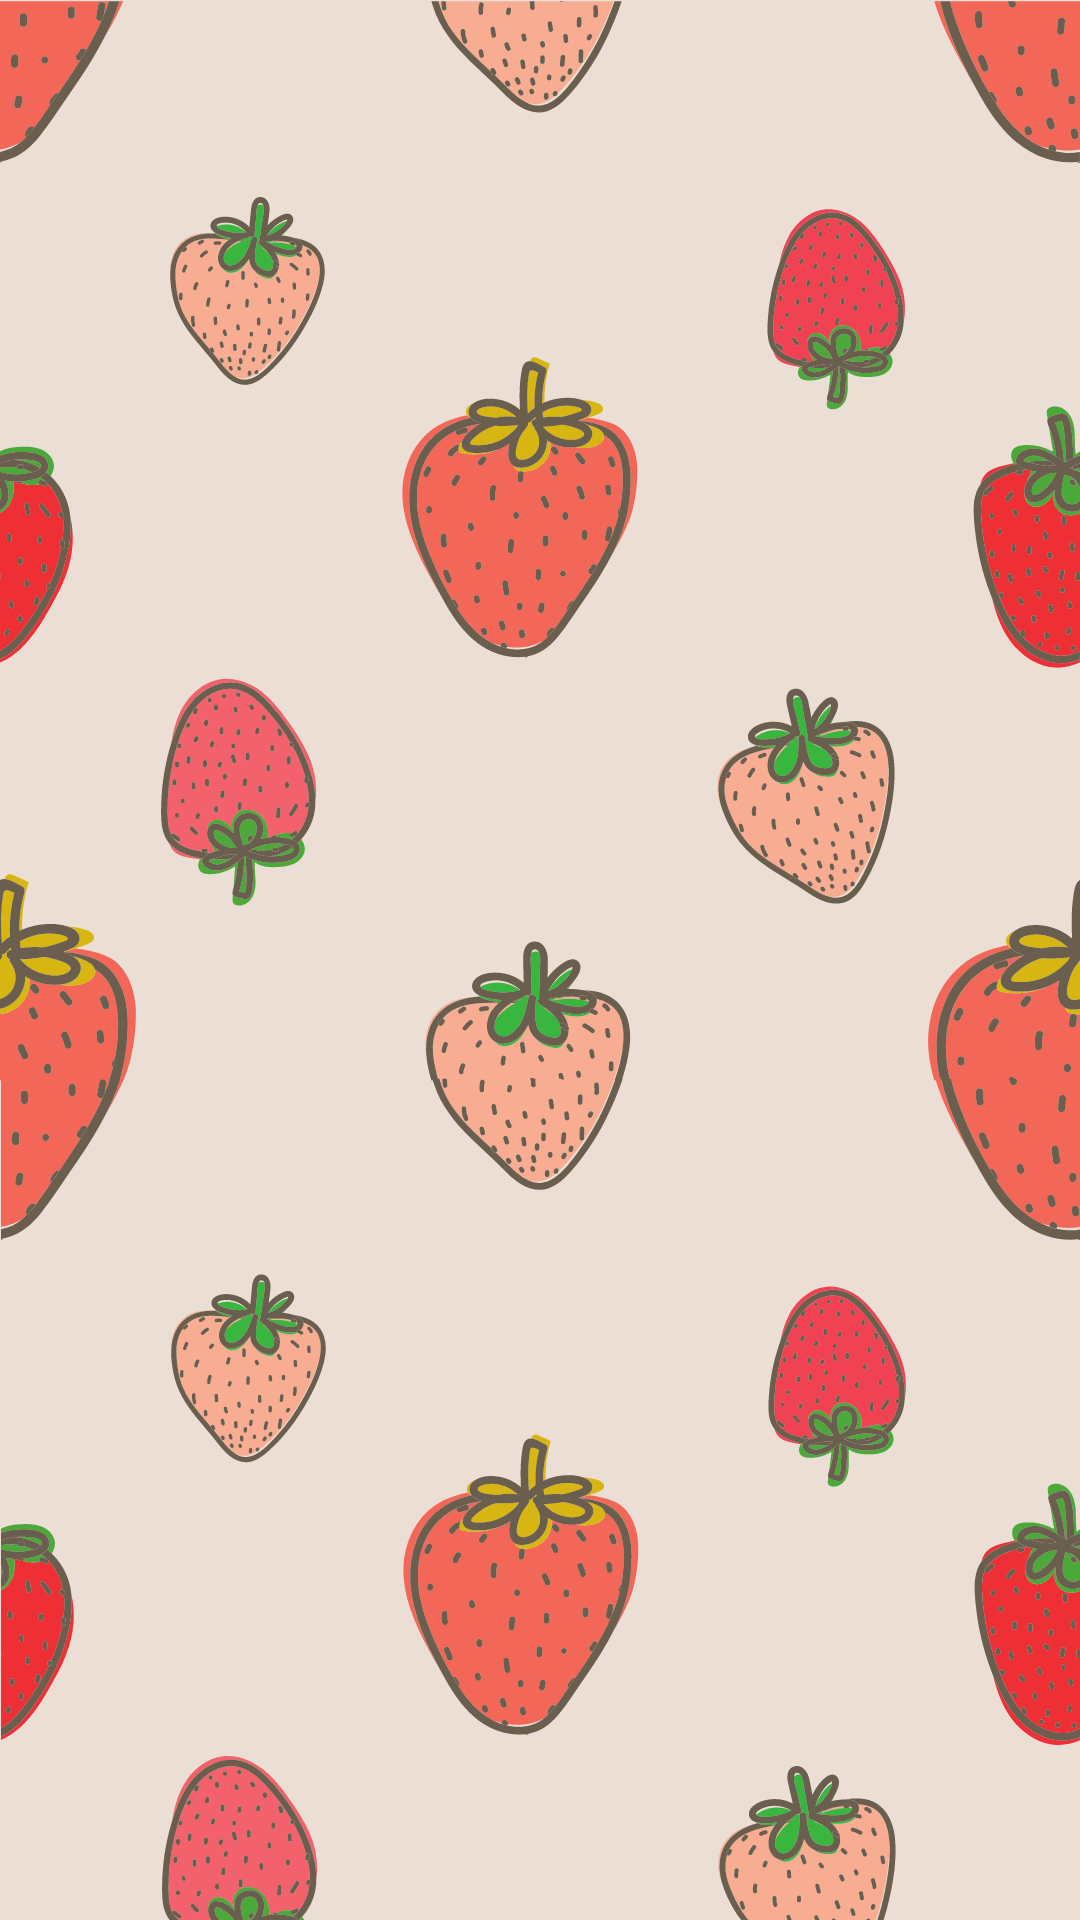 A pattern of strawberries on beige background - Cute, spring, pretty, strawberry, cute iPhone, phone, food, illustration